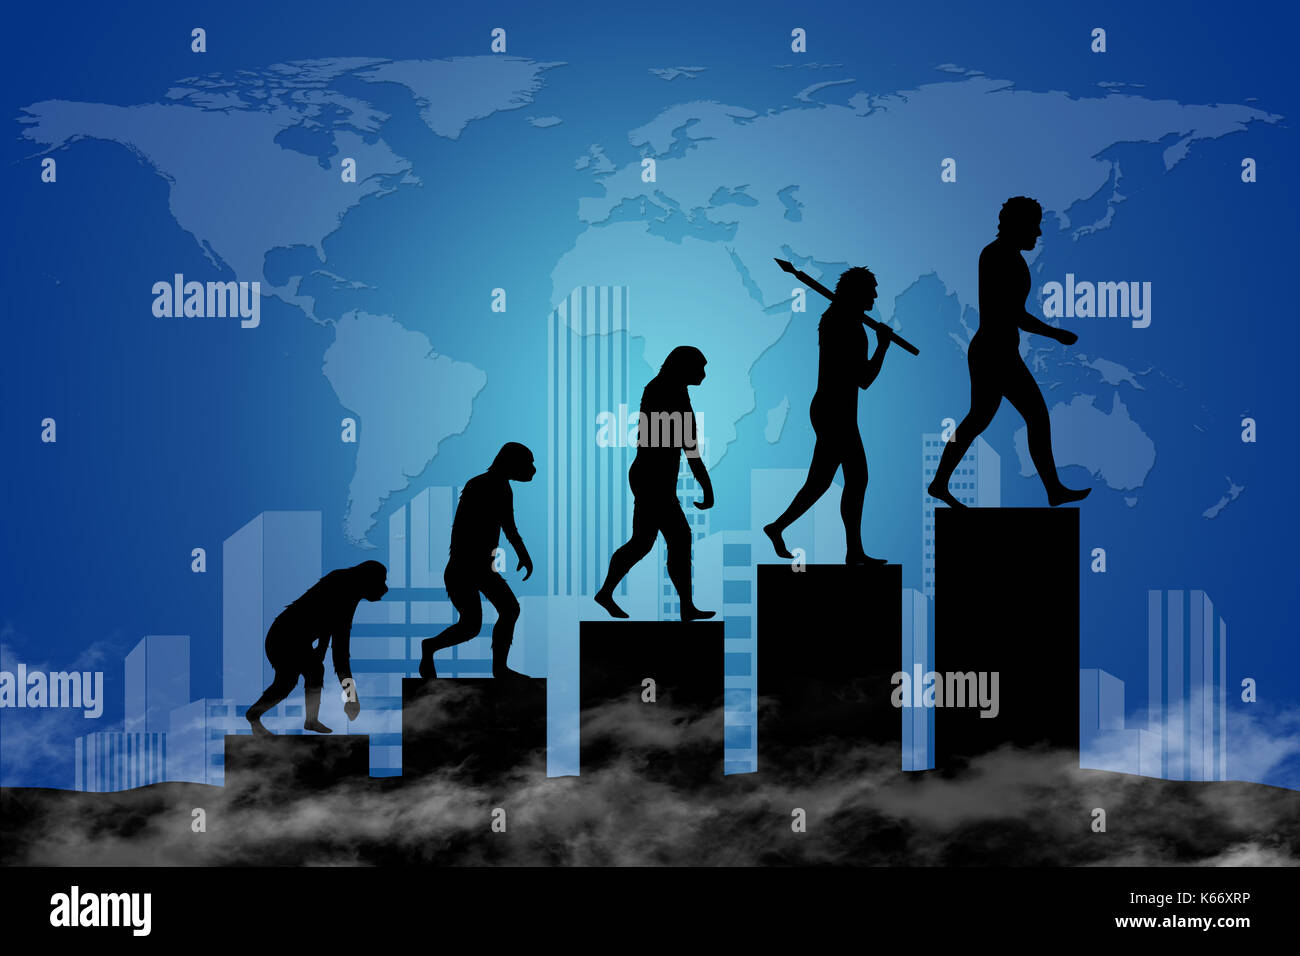 Human evolution into a modern world of digital technology. City-scape and world map in the background. Stock Photo